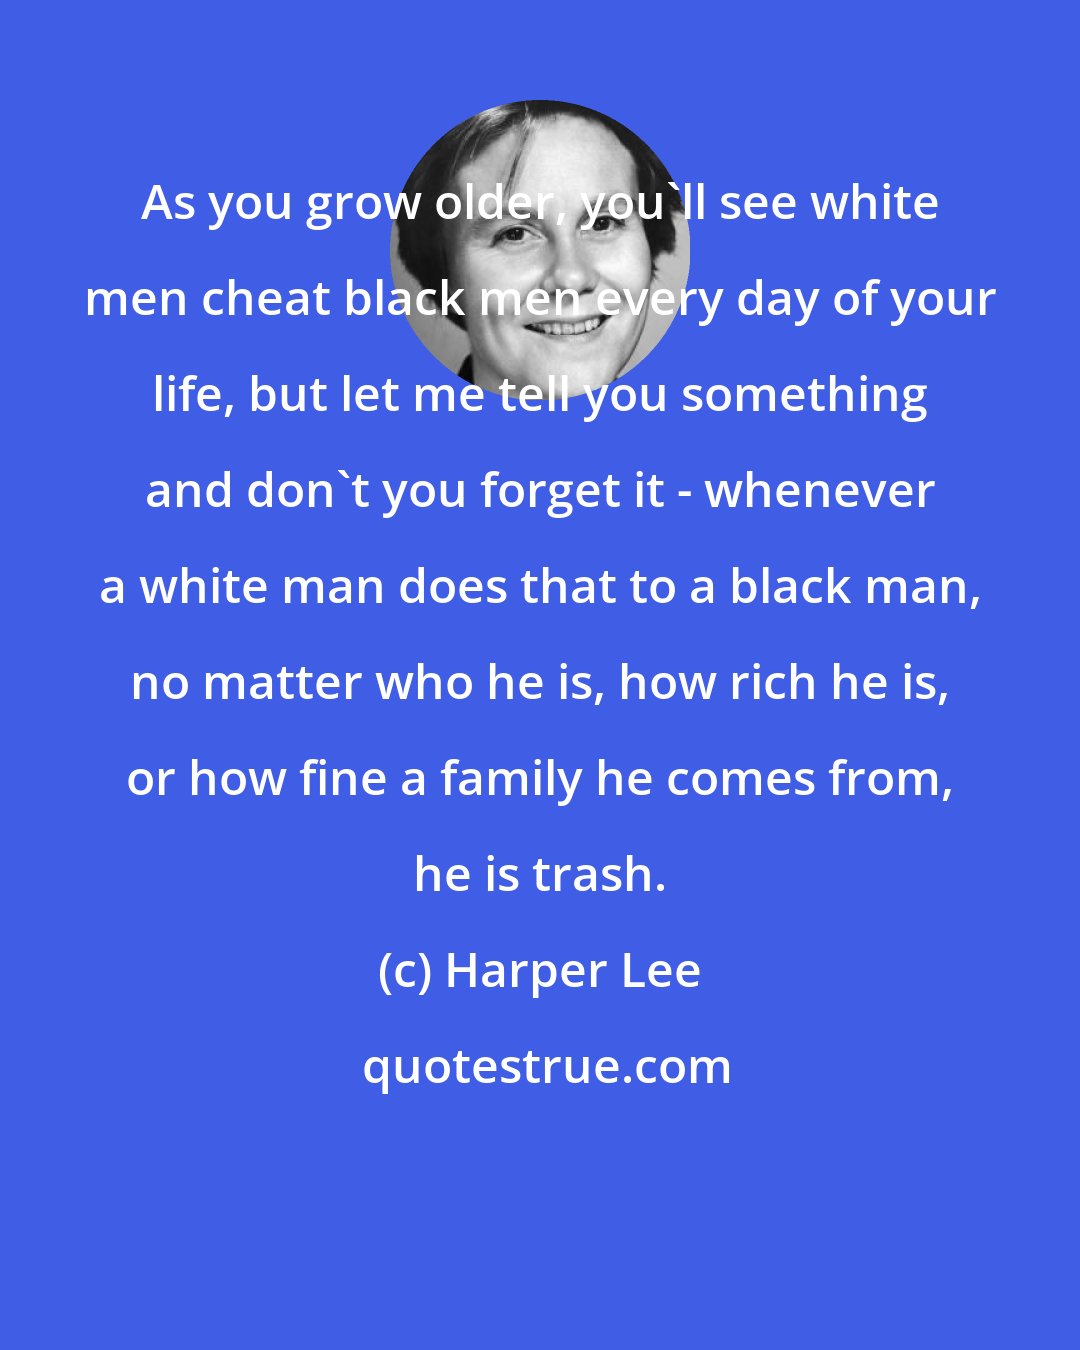 Harper Lee: As you grow older, you'll see white men cheat black men every day of your life, but let me tell you something and don't you forget it - whenever a white man does that to a black man, no matter who he is, how rich he is, or how fine a family he comes from, he is trash.